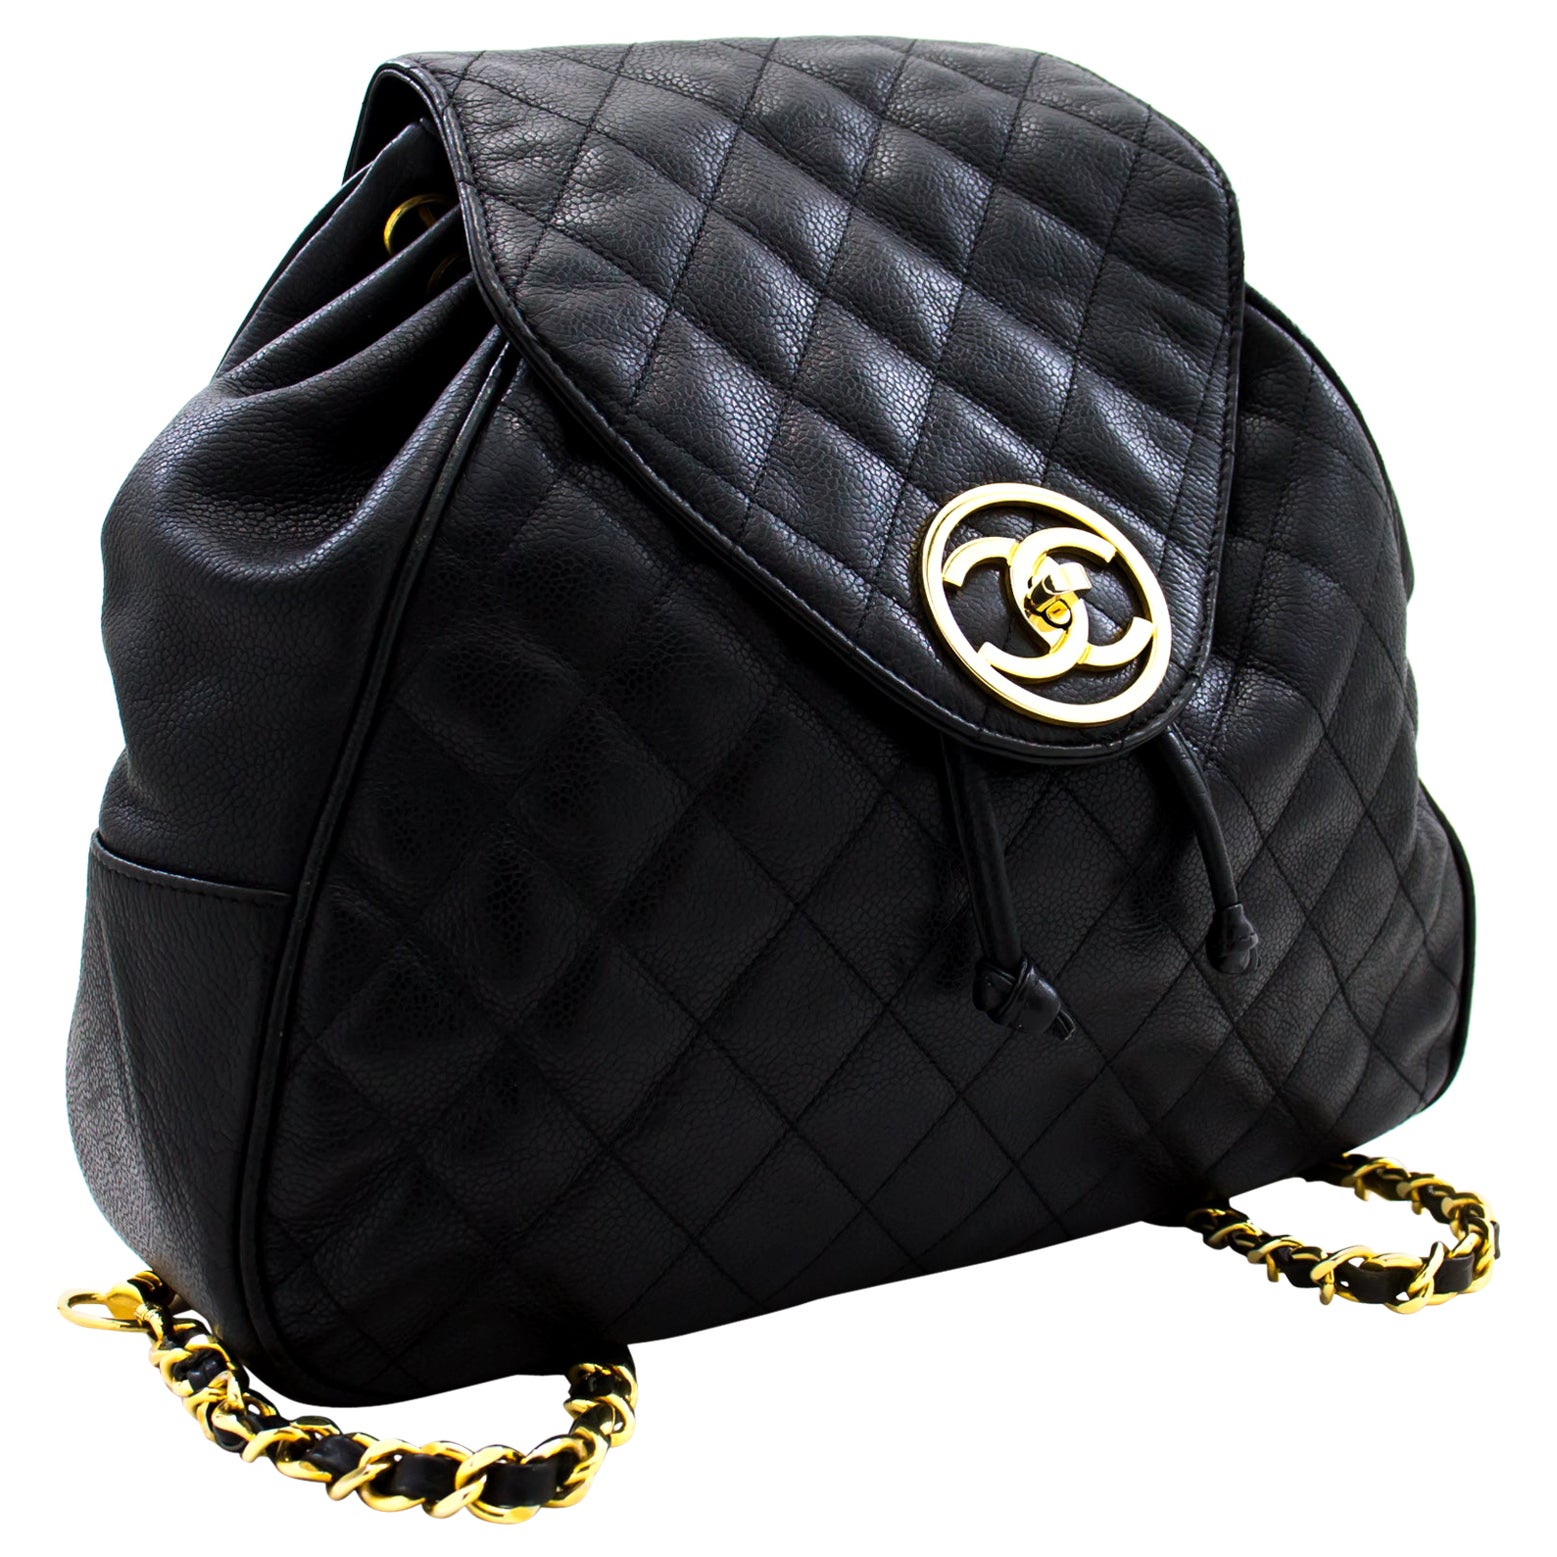 CHANEL Caviar Backpack Chain Bag Leather Black Flap Gold Hardware